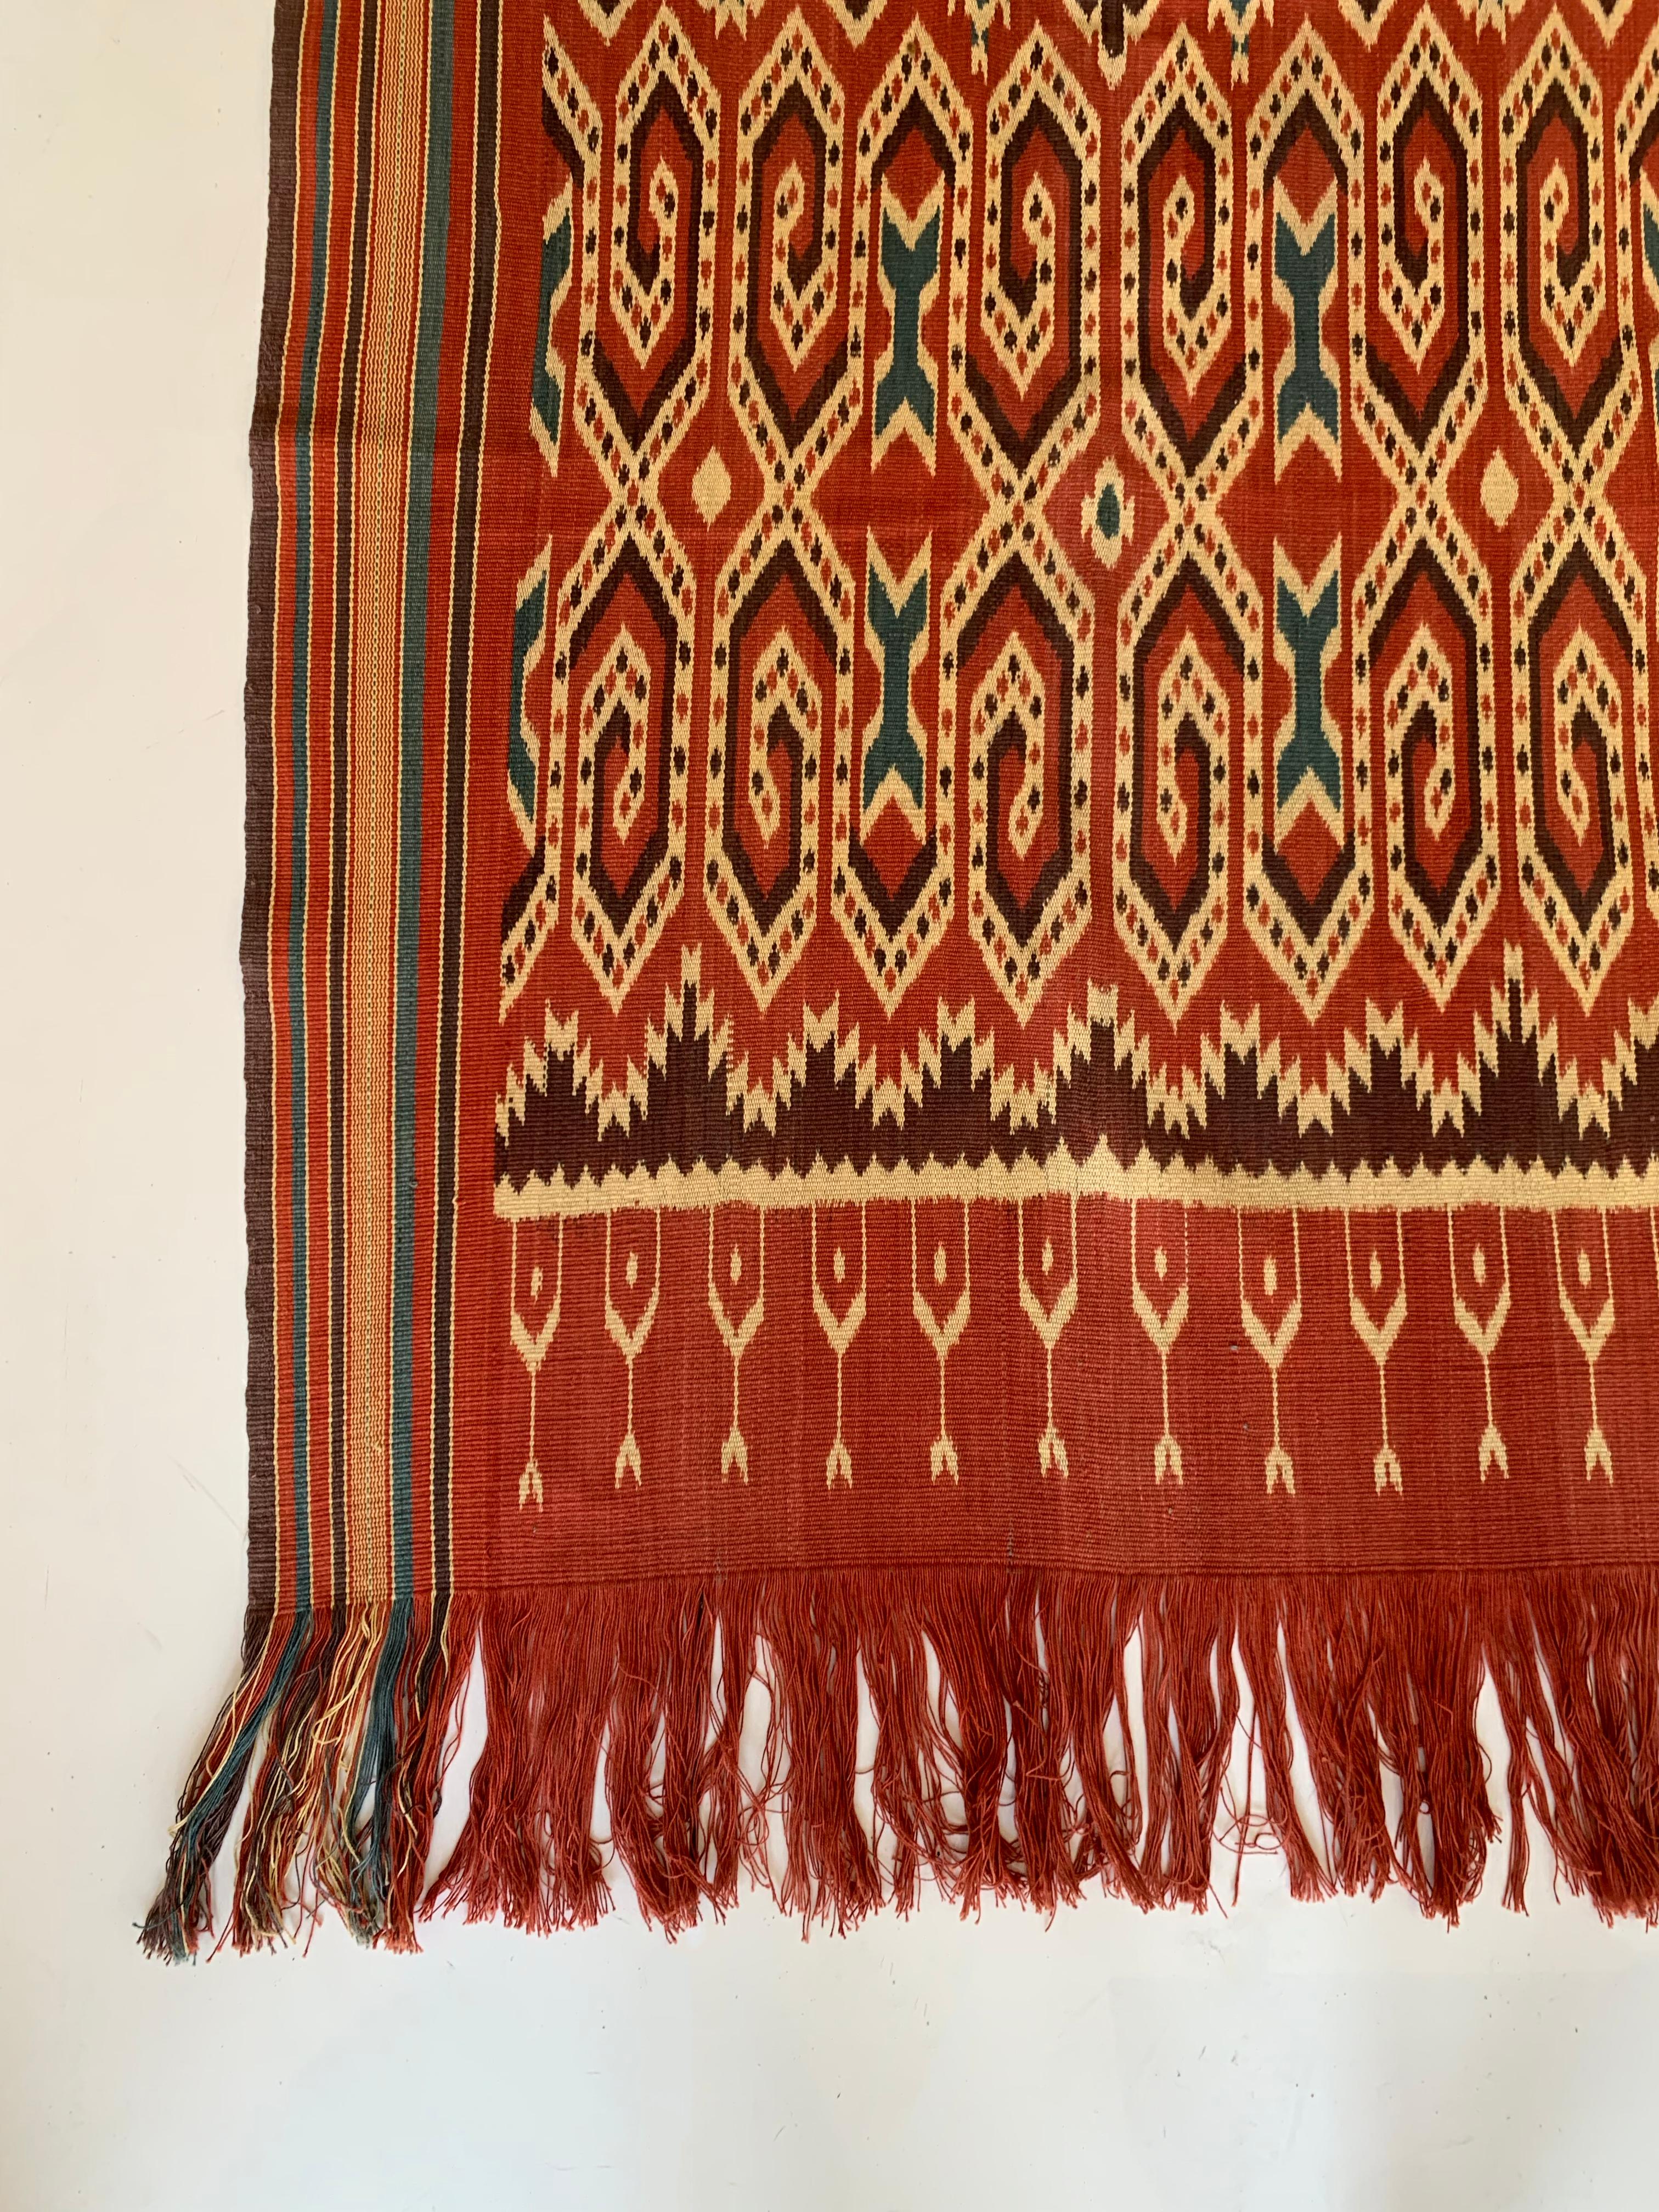 Indonesian Ikat Textile from Toraja Tribe of  Sulawesi with Stunning Tribal Motifs